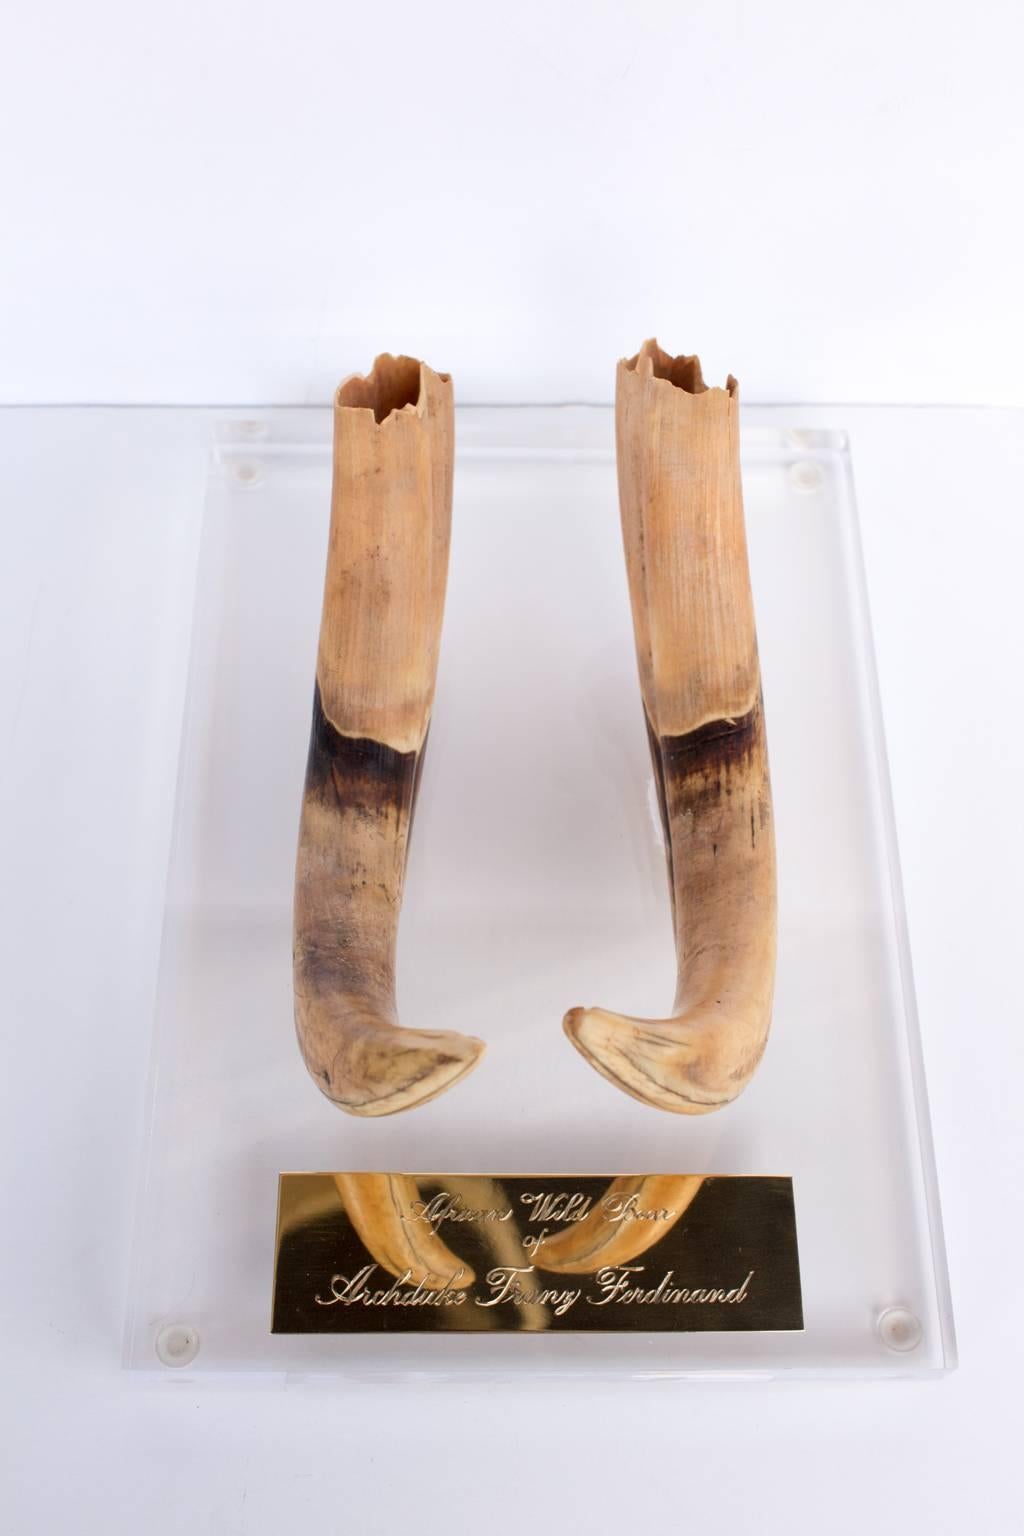 Antique African wild boar tusk hunted by Archduke Franz Ferdinand displayed on acrylic with hand engraved brass plaque. Archduke Franz Ferdinand was the heir to the Austro-Hungarian throne and it was his assassination in Sarajevo that kicked off